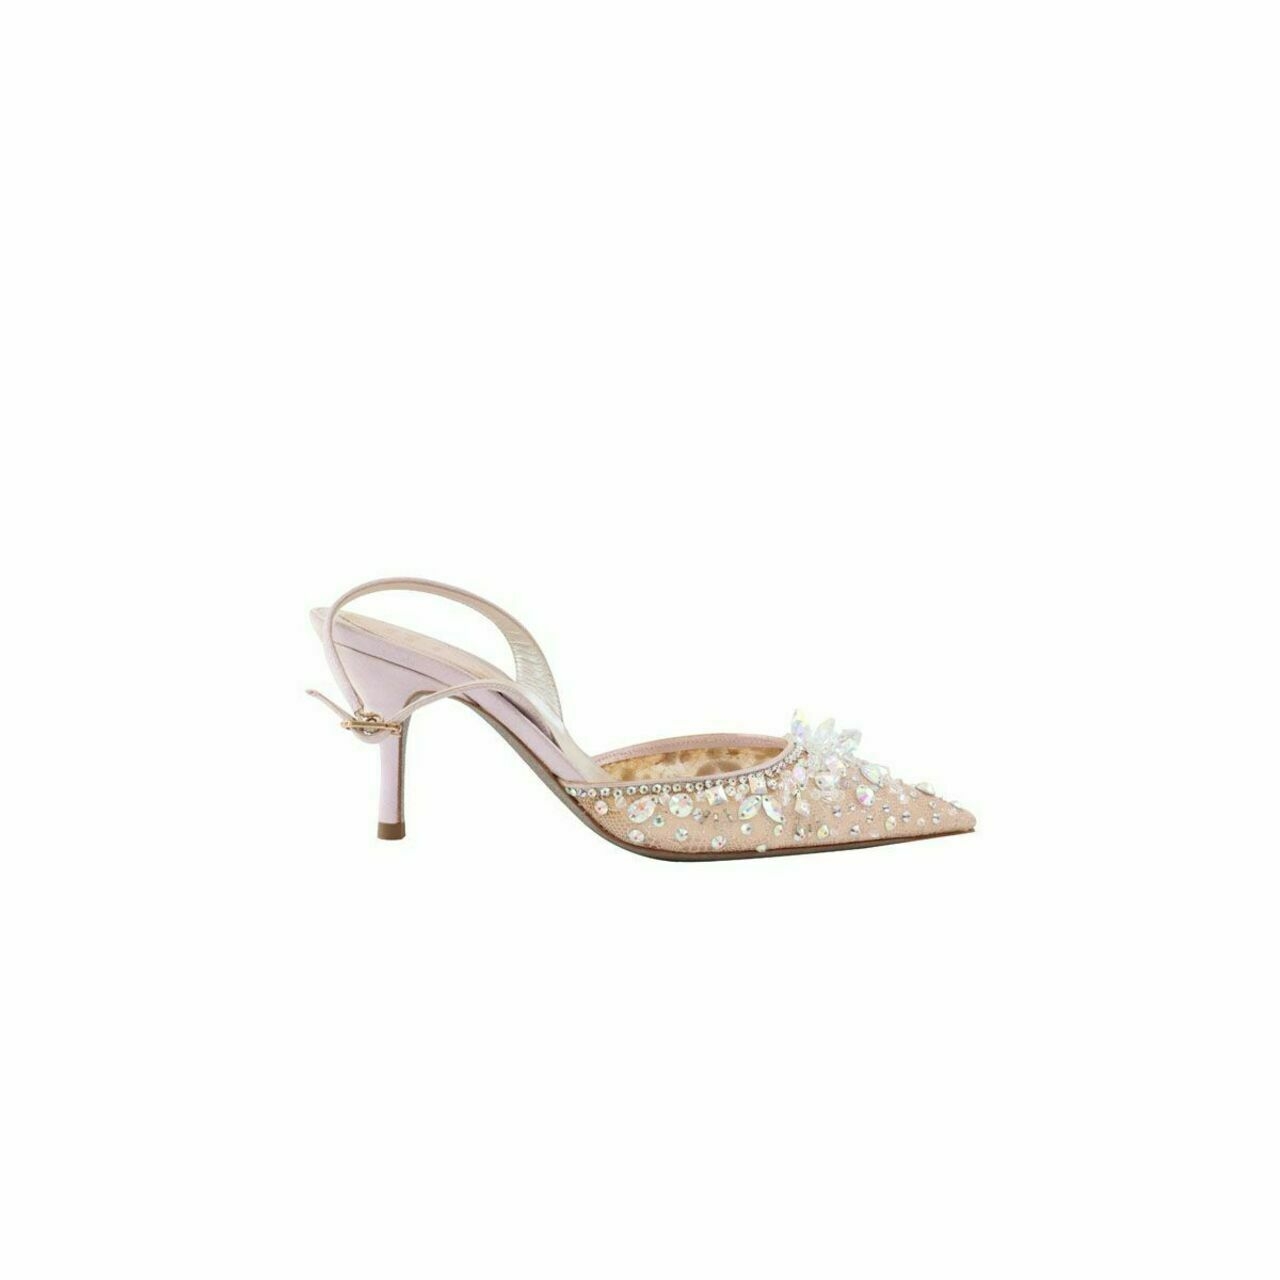 Kristella Lace Slingback Pumps With Crystals